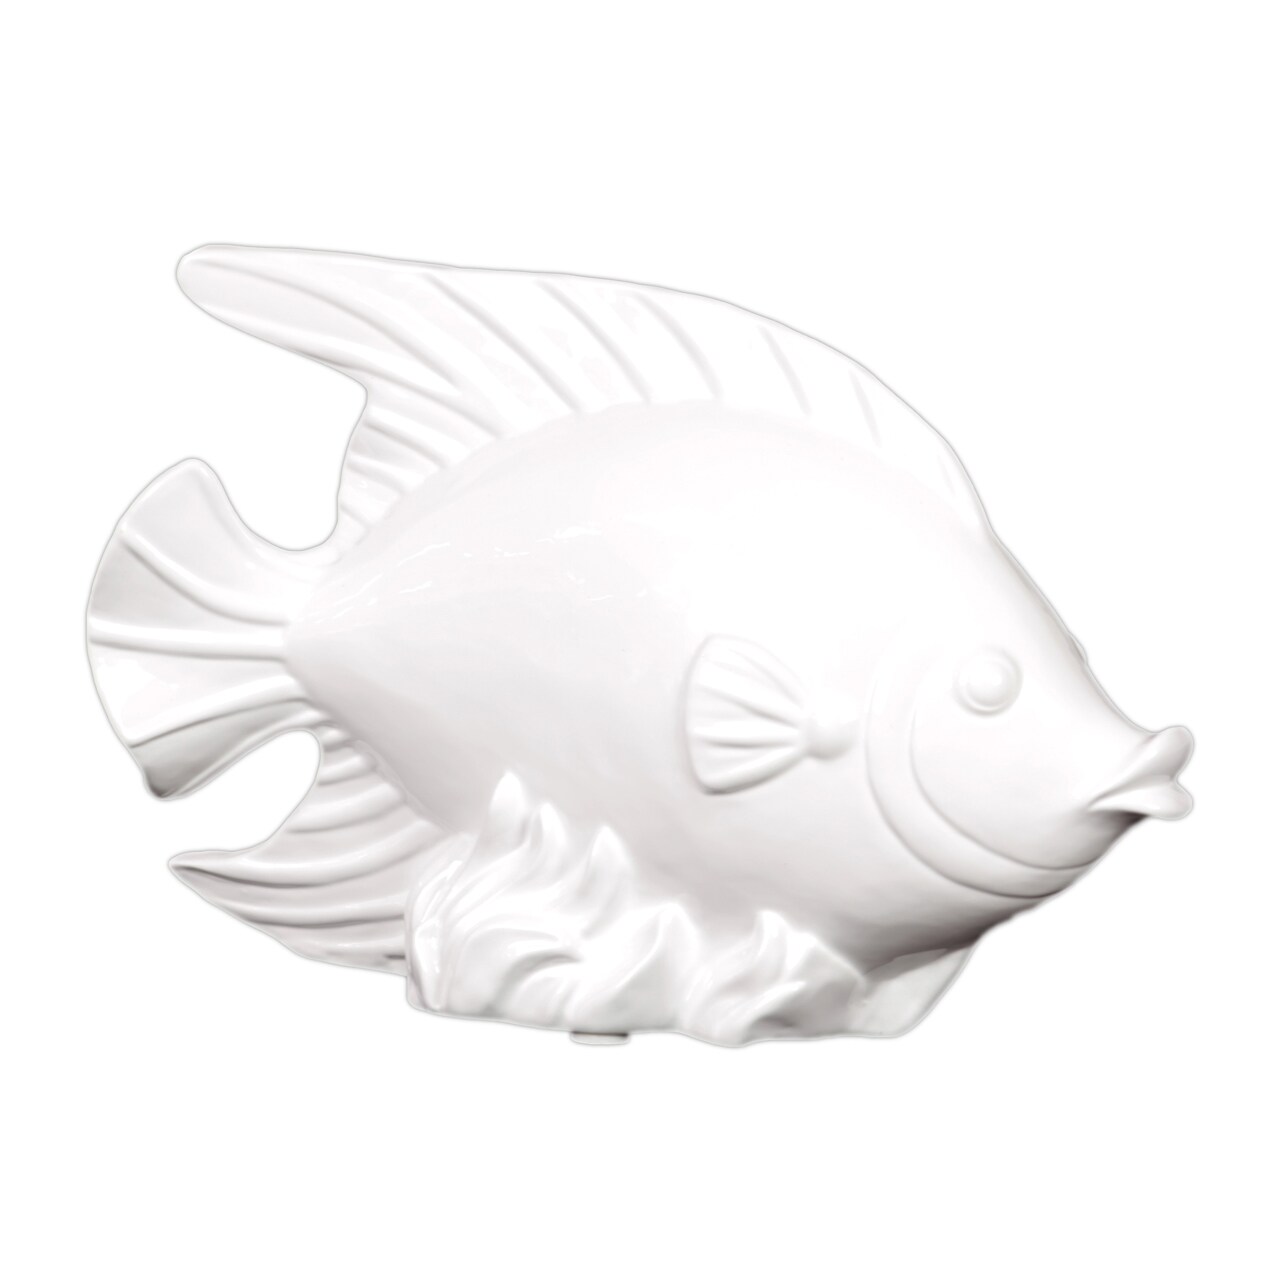 Urban Trends Collection White Ceramic Fish (CeramicDimensions 7.75 inches high x 11.5 inches wide x 3.25 inches deepModel UTC30911UPC 877101309116For decorative purposes onlyDoes not hold water)